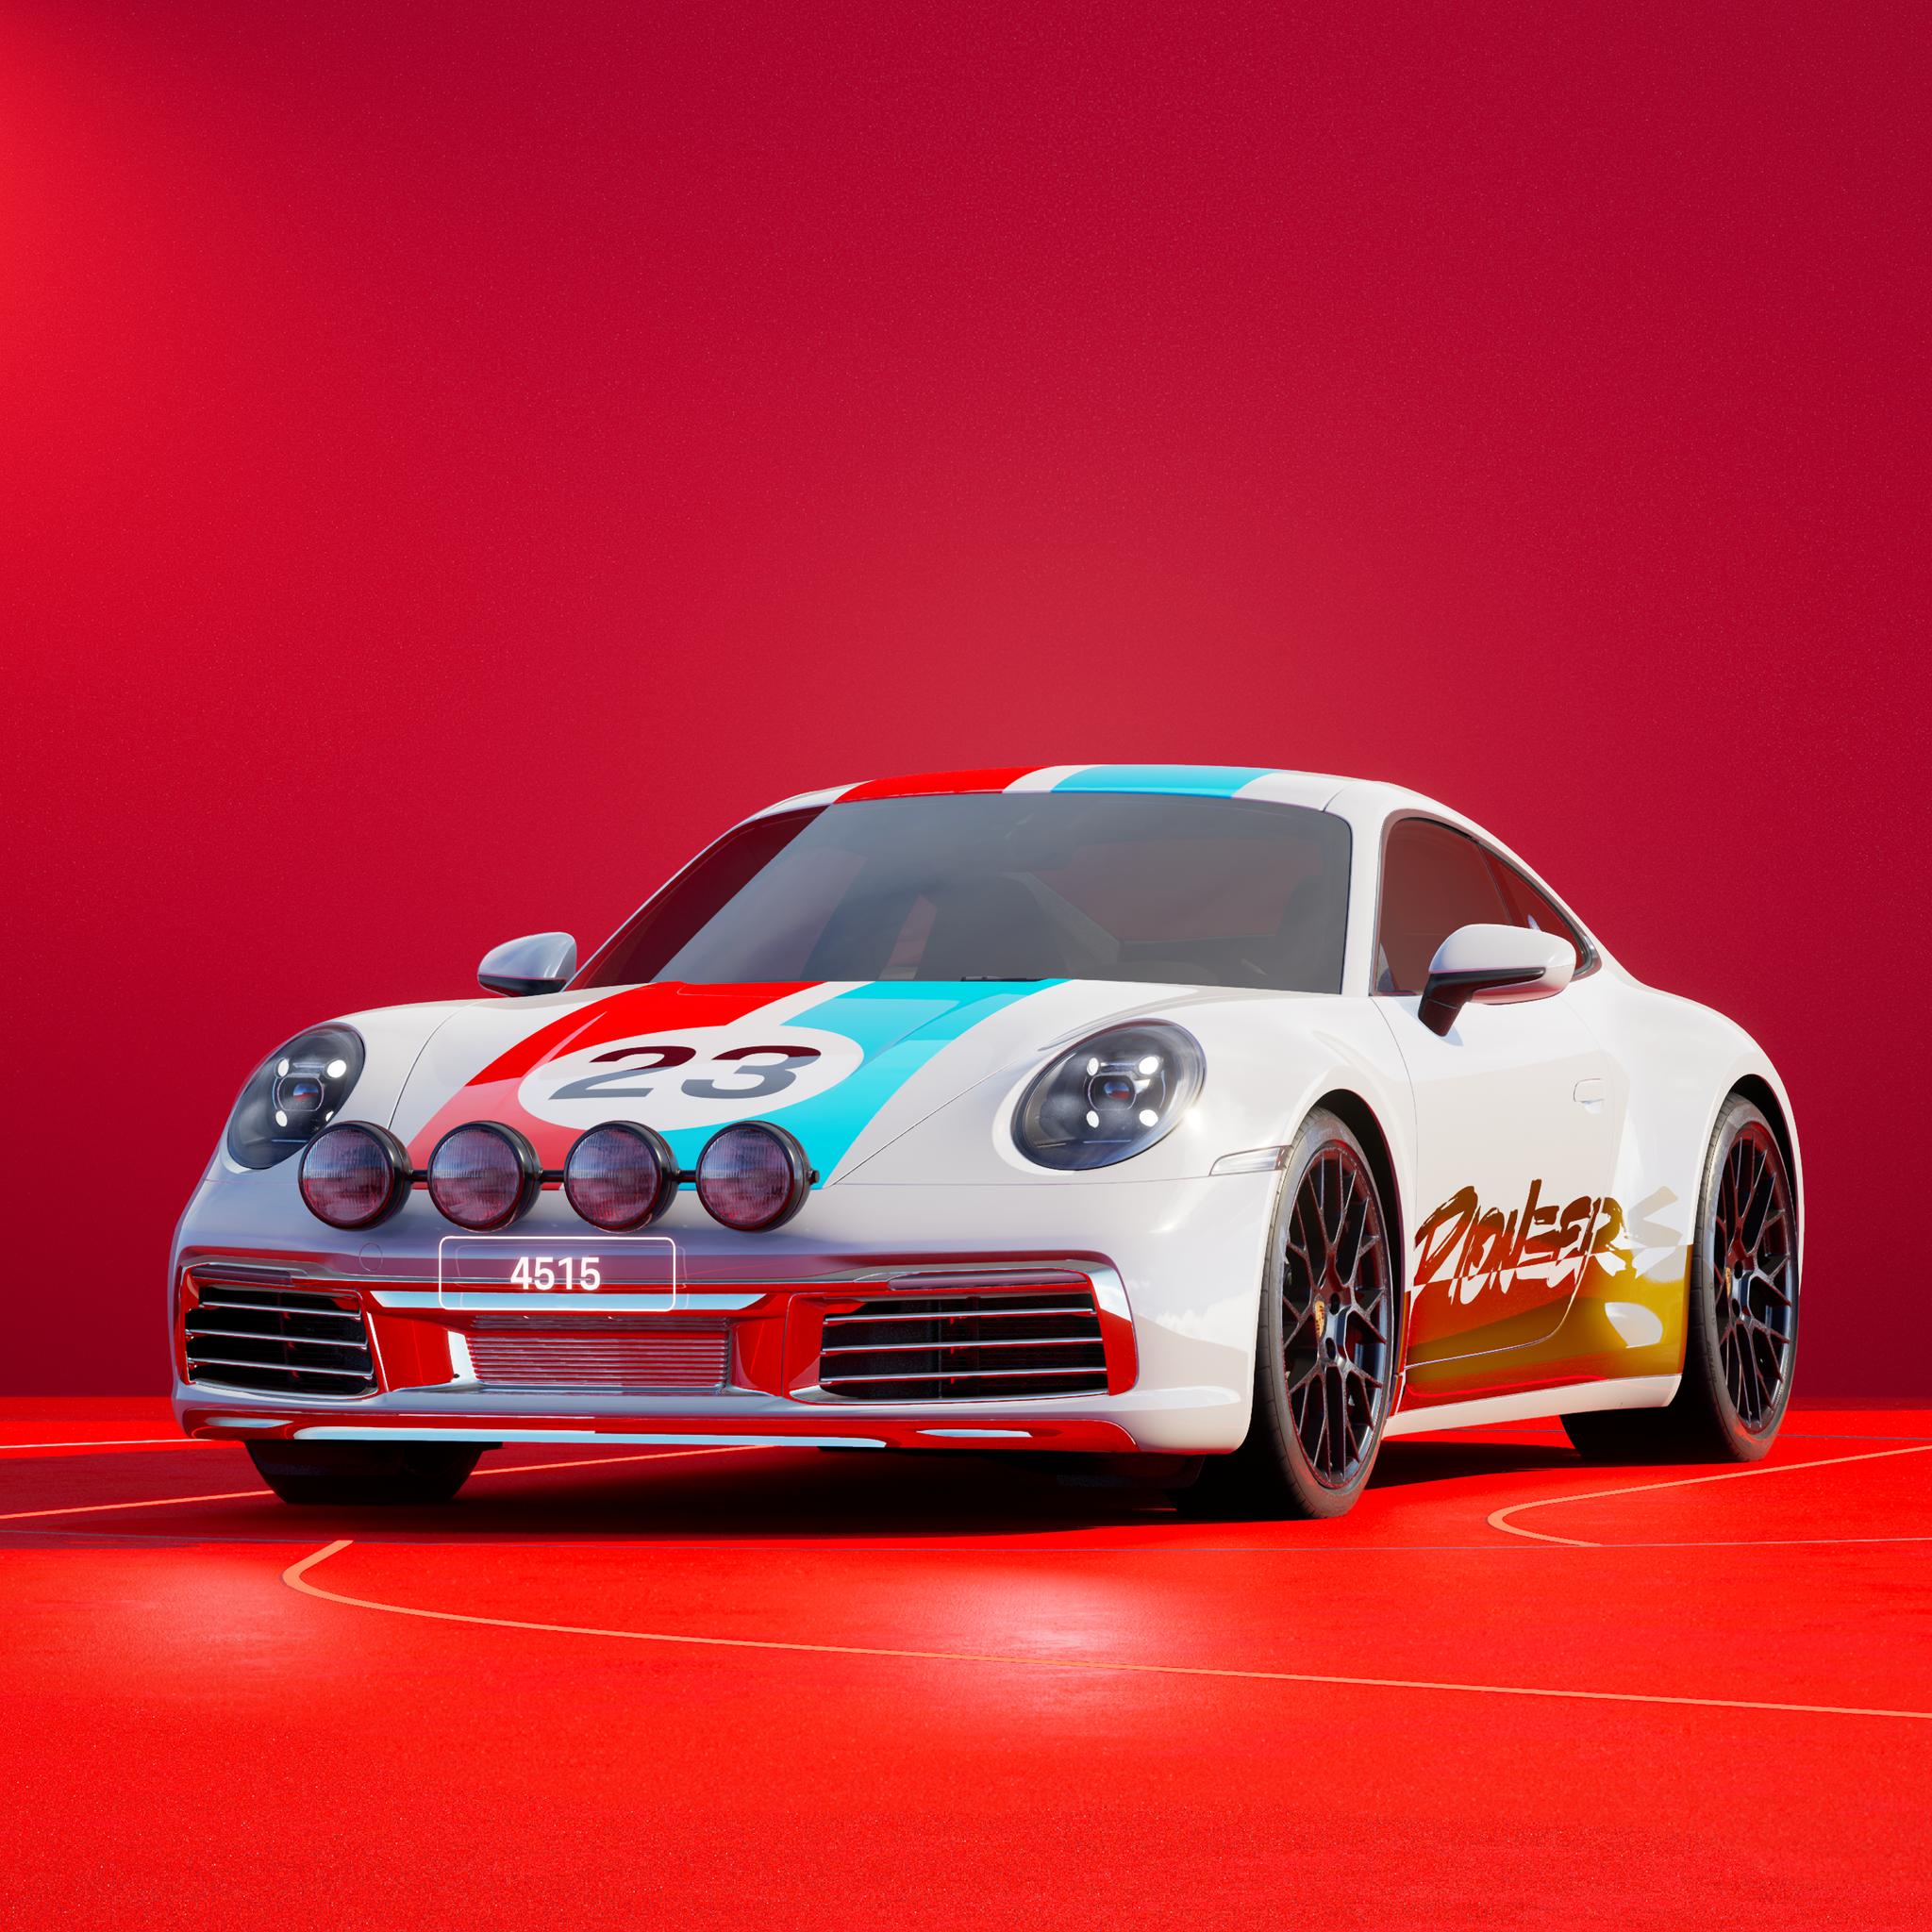 The PORSCHΞ 911 4515 image in phase